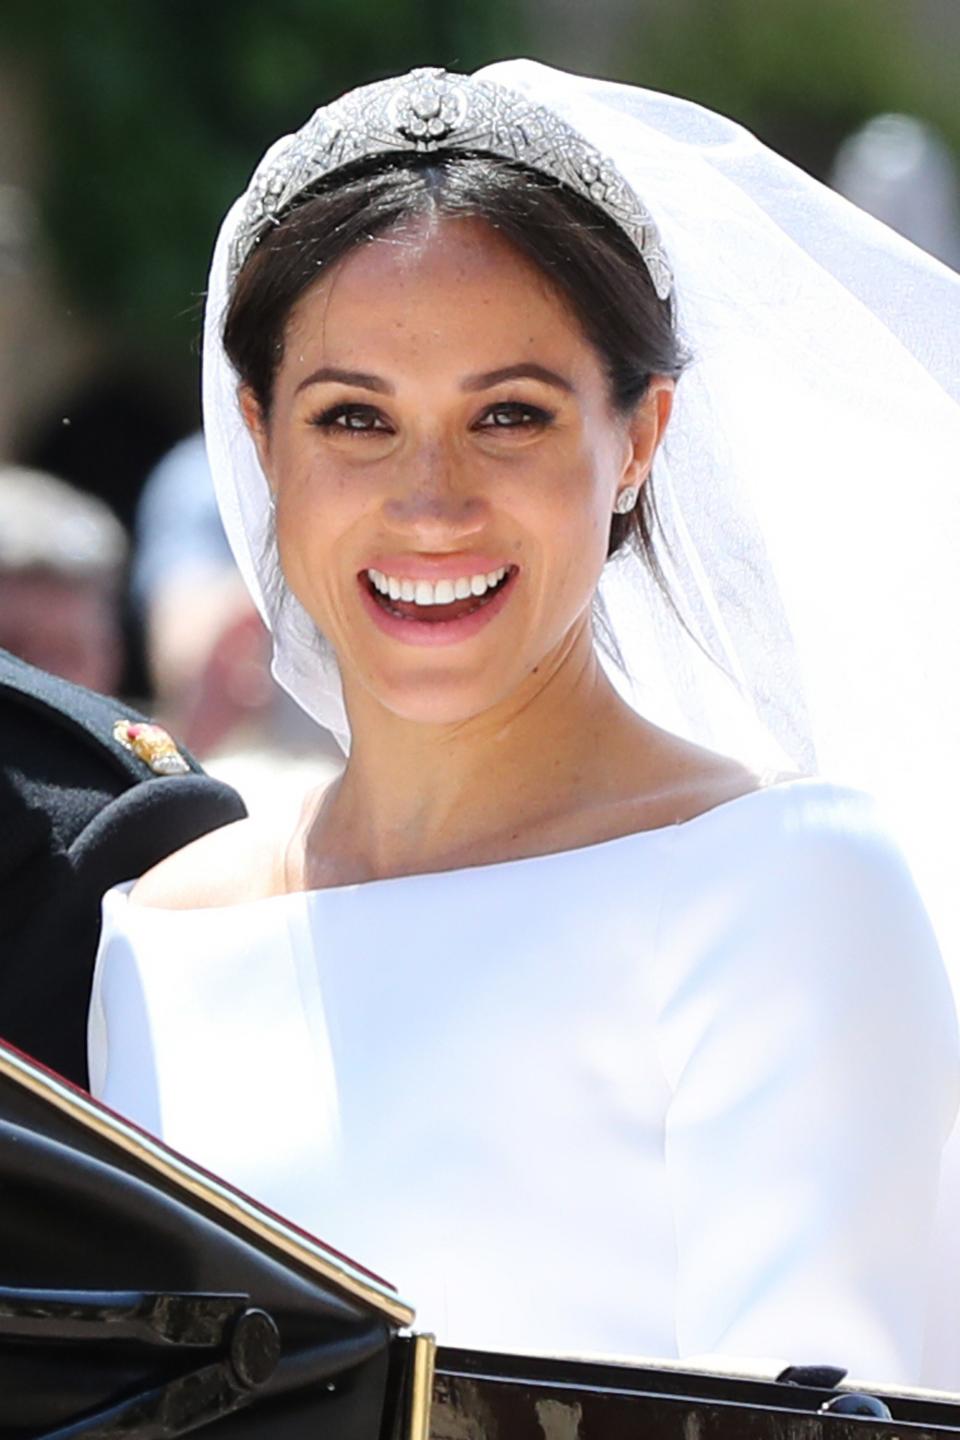 <h1 class="title">Prince Harry Marries Ms. Meghan Markle - Procession</h1><cite class="credit">Gareth Fuller - WPA/Getty Images</cite>